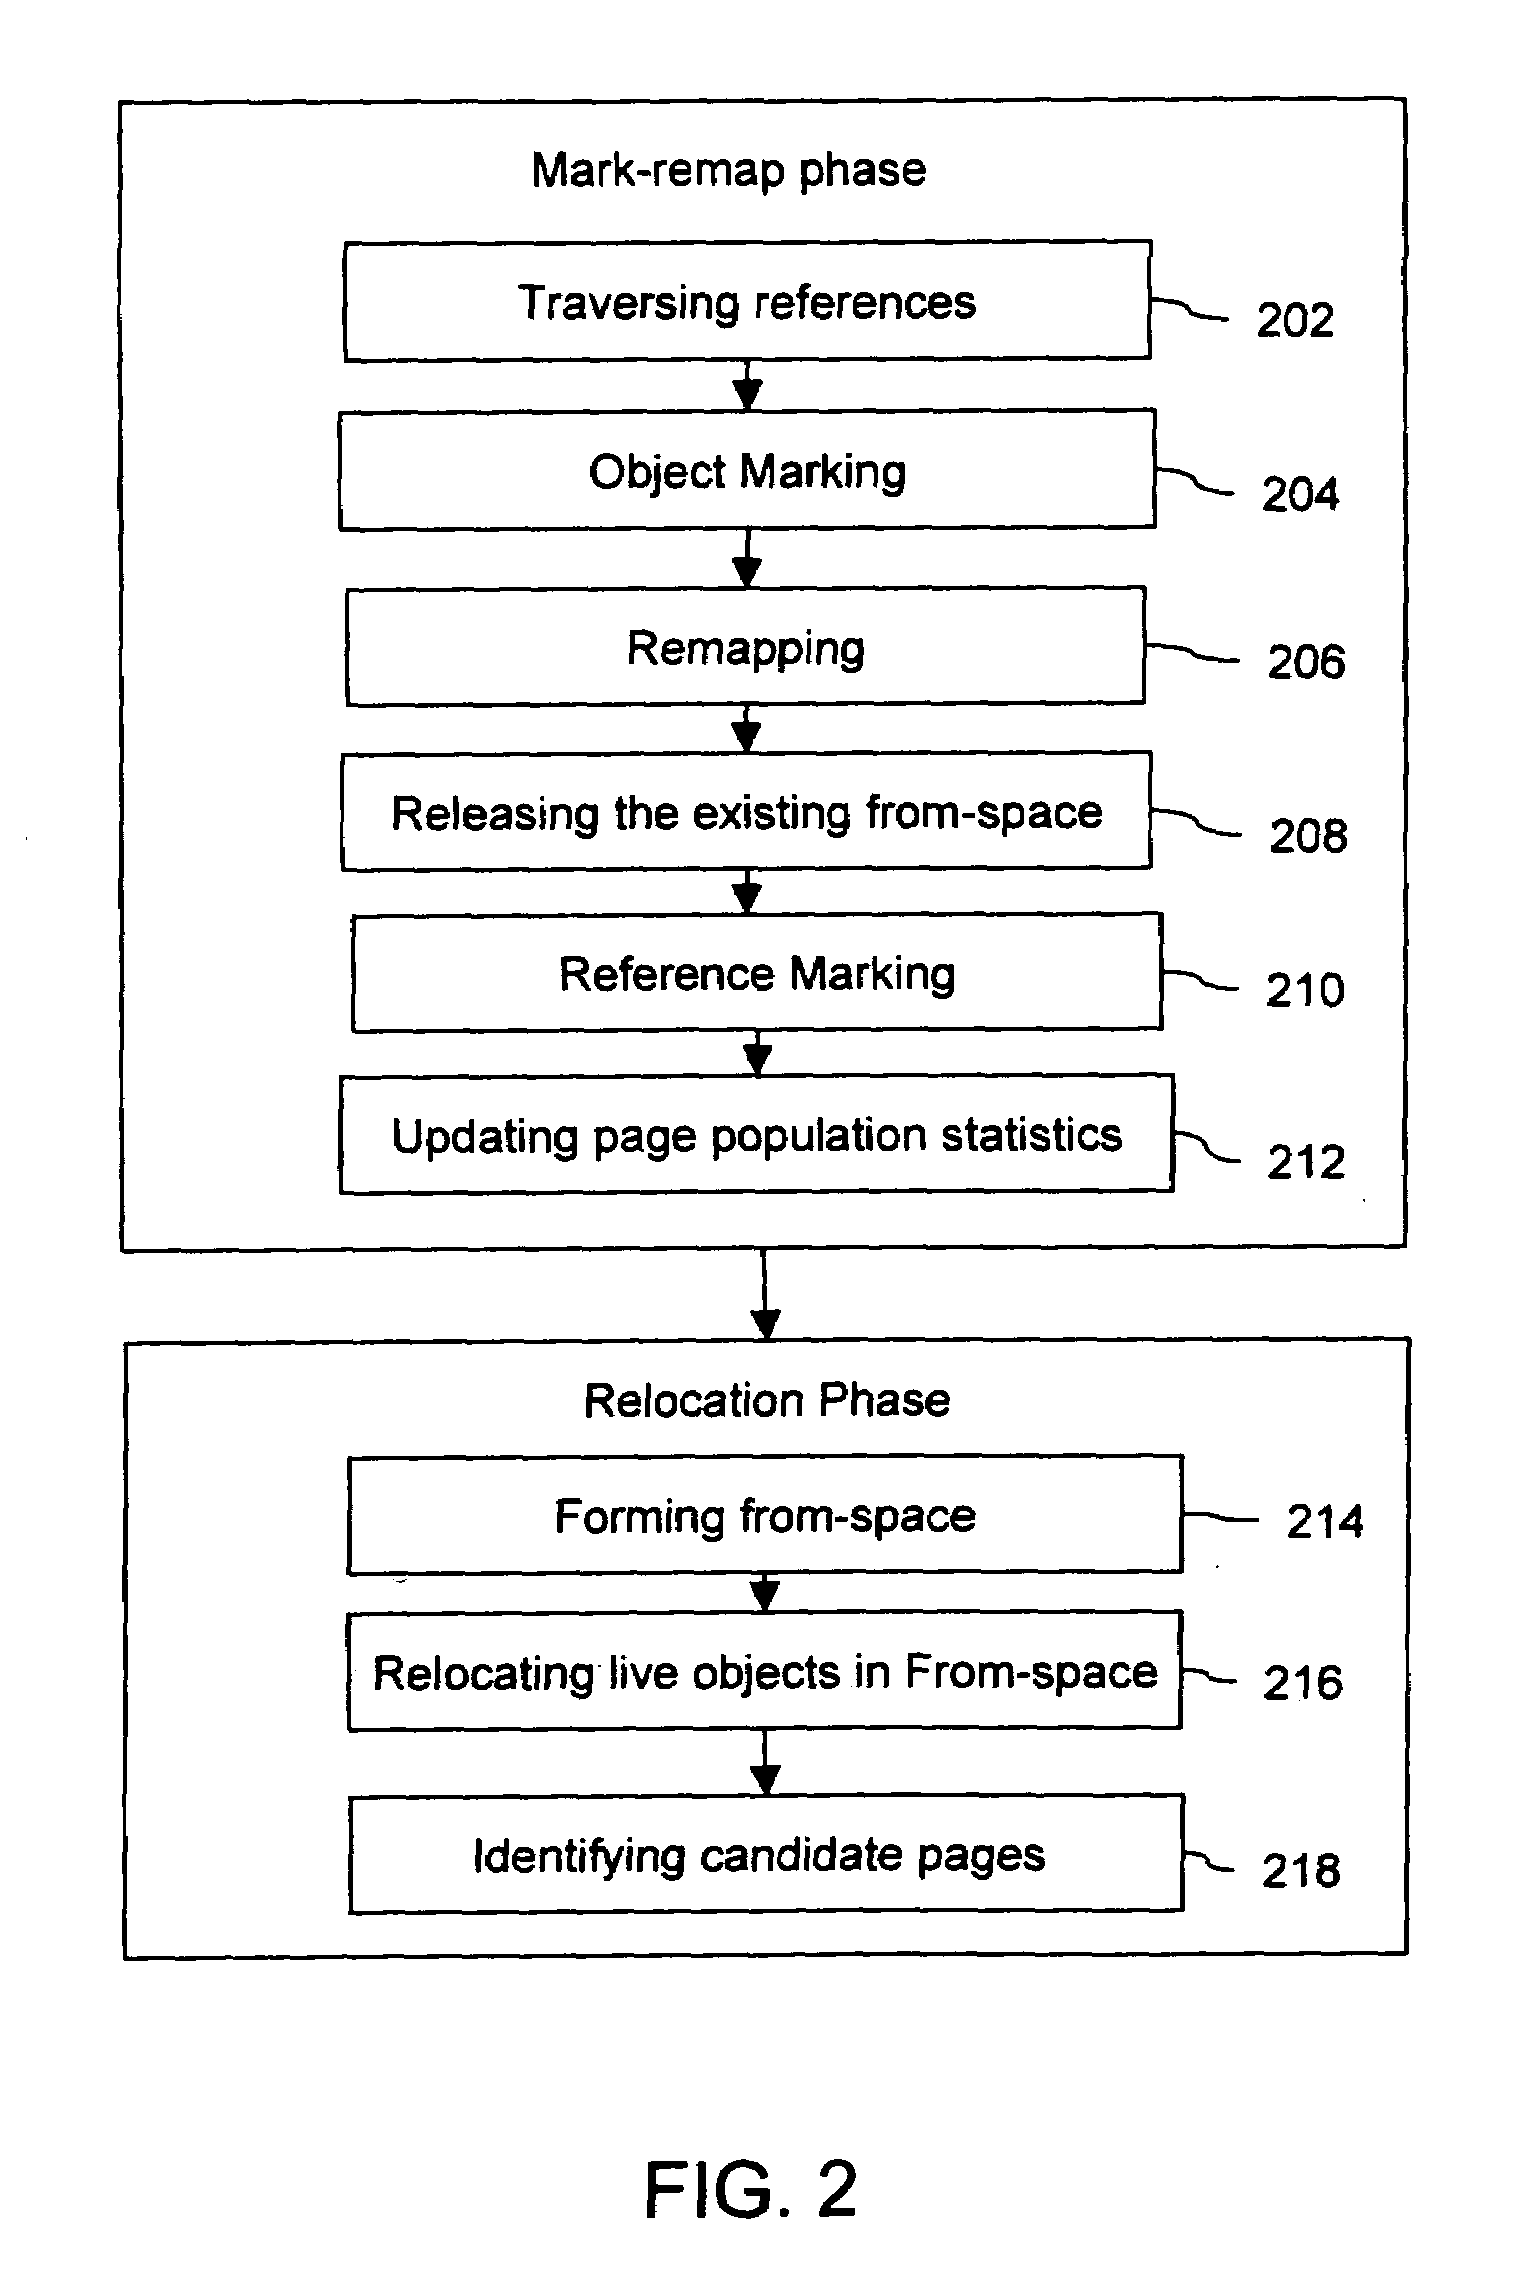 System and method for concurrent compacting self pacing garbage collection using loaded value and access barriers